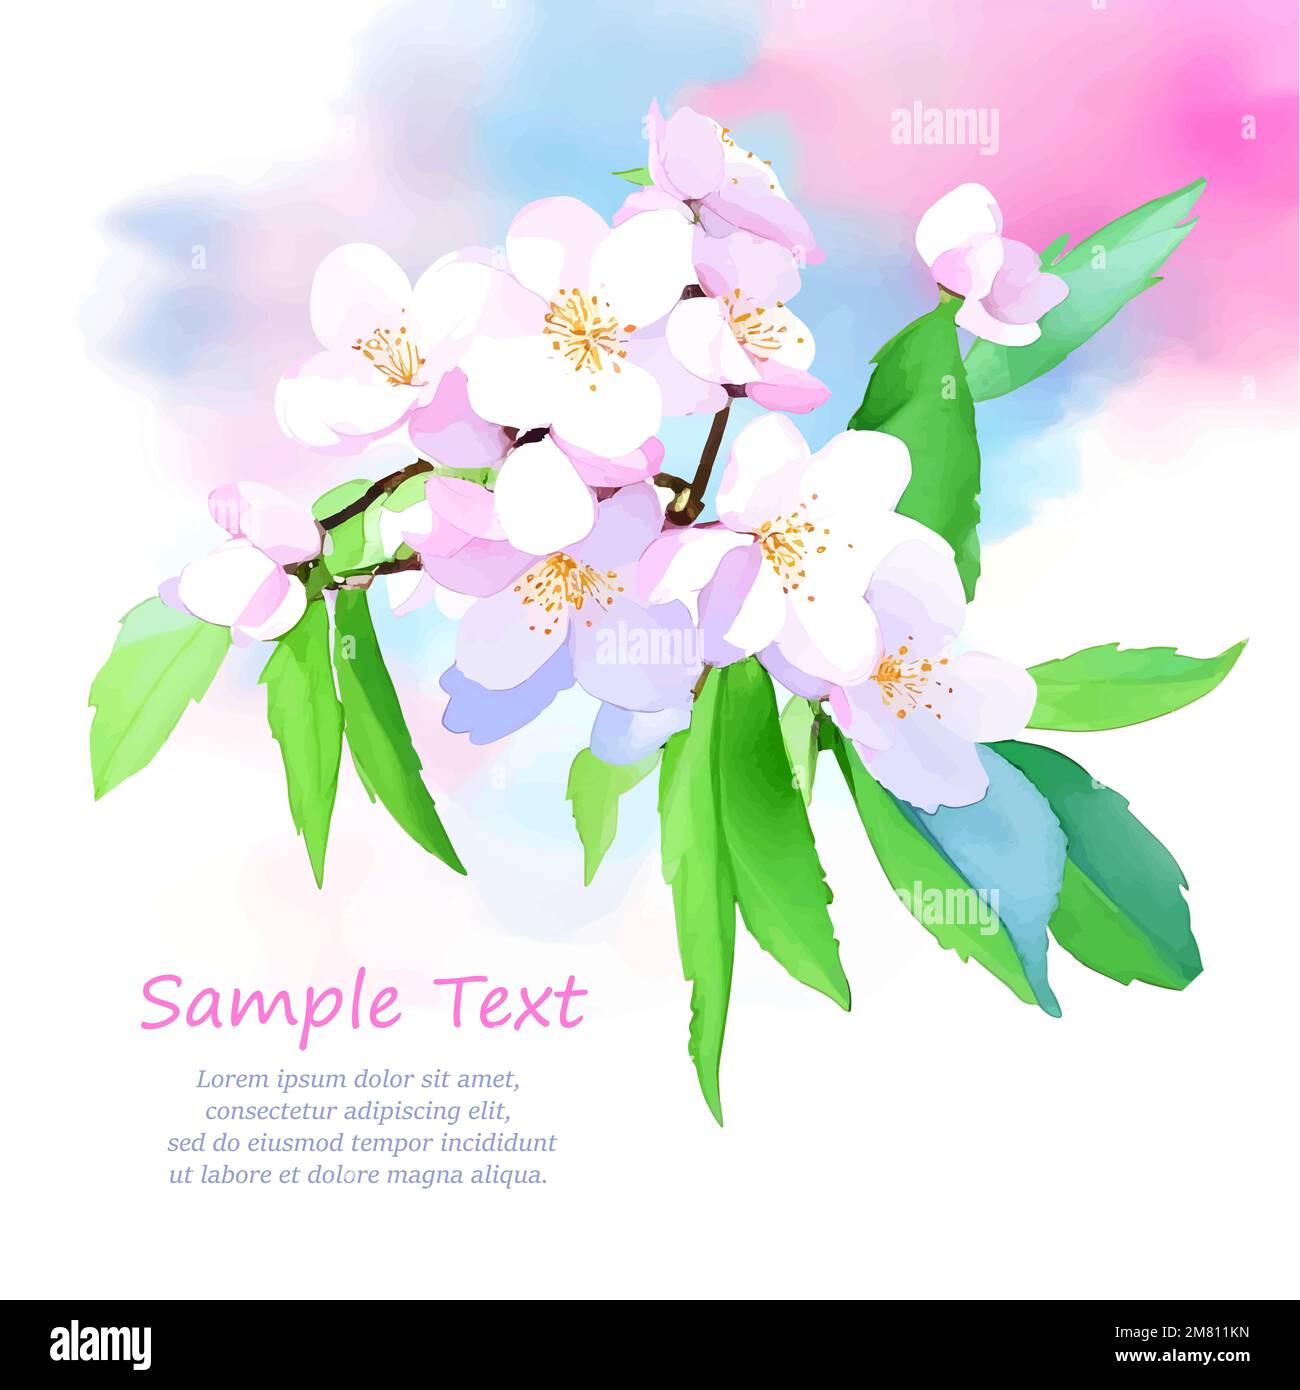 Free Flowers, Cherry, Blossoms Background Images, Flower Filled Love Trees  Photo Background PNG and Vectors